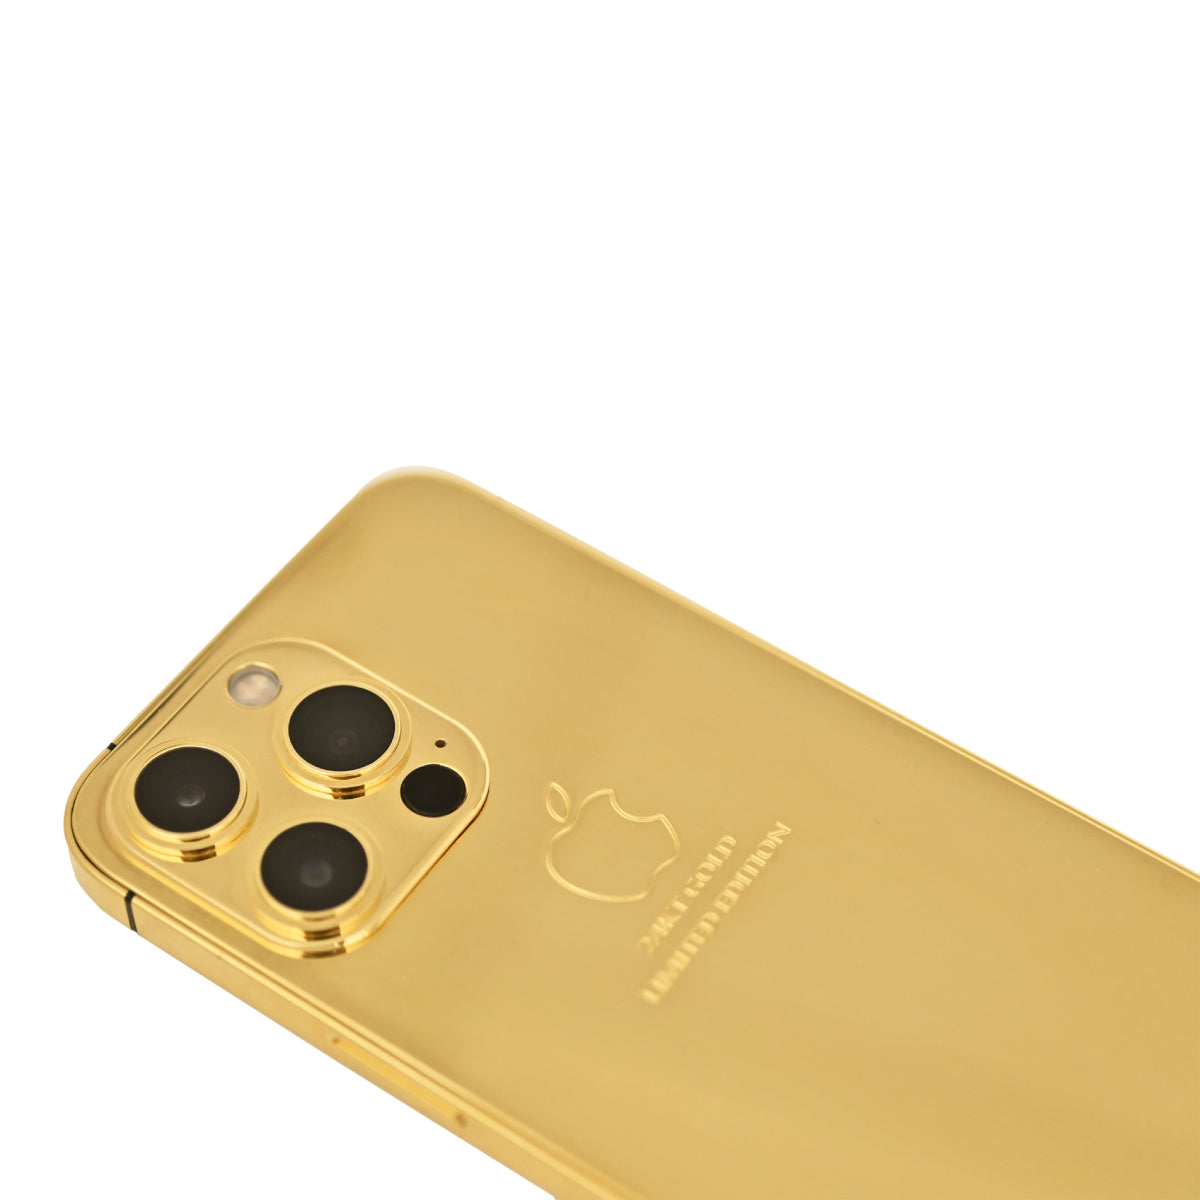 Caviar Luxury 24k Full Gold Customized iPhone 13 Pro 256 GB Limited Edition